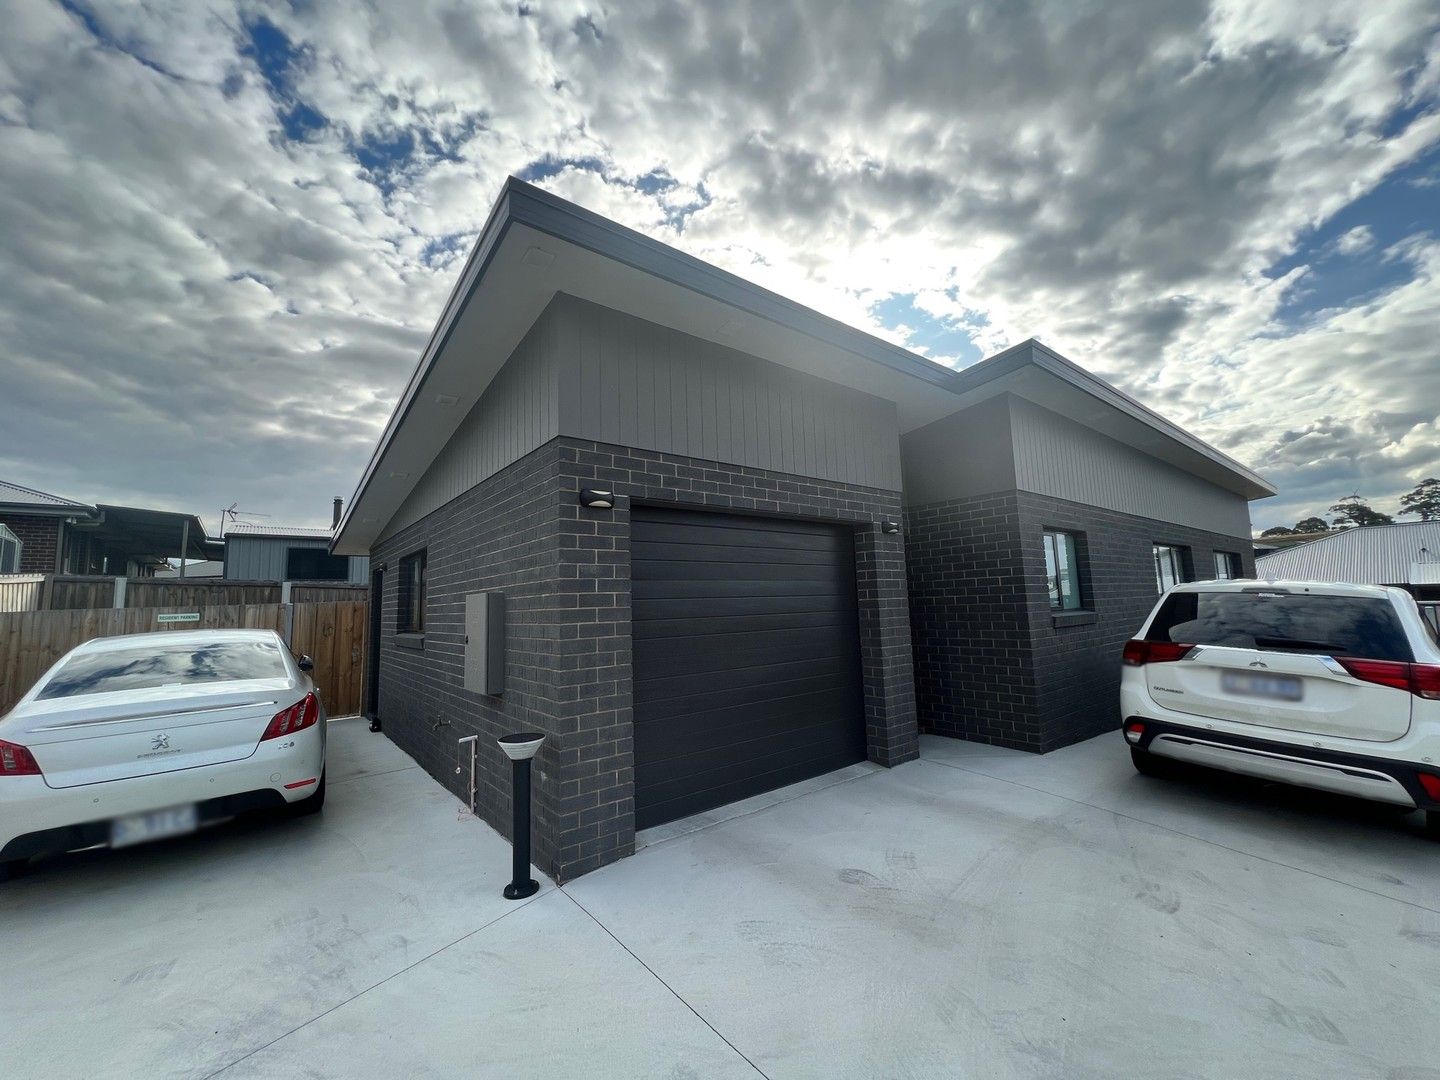 3 bedrooms House in 2/24 Heron Crescent MIDWAY POINT TAS, 7171